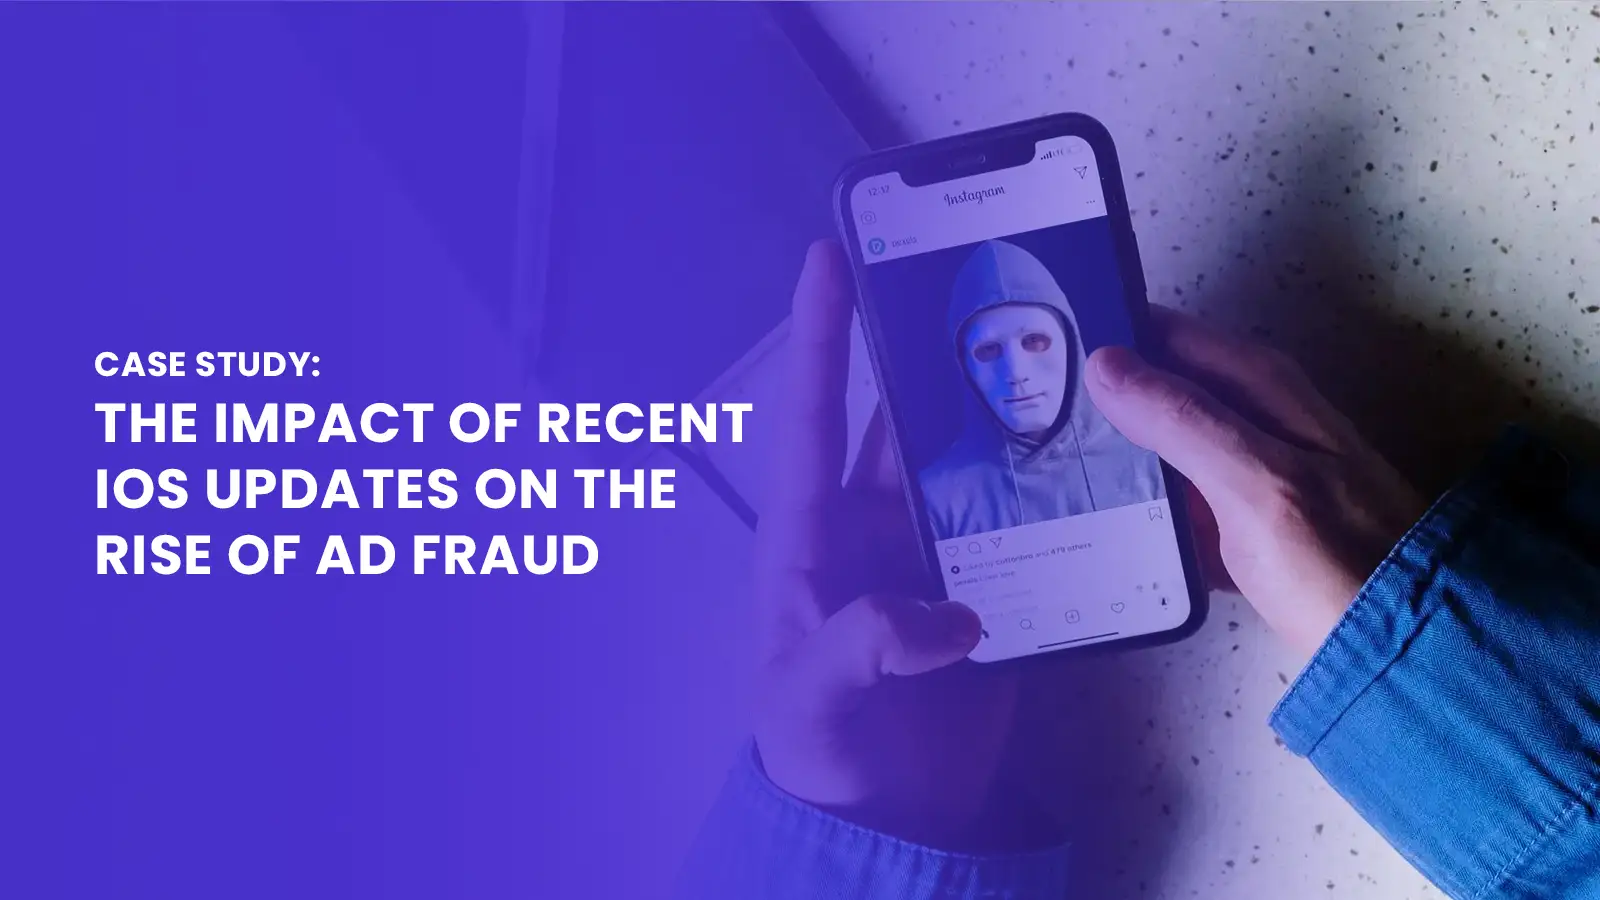 The Impact of Recent iOS Updates on the Rise of Ad Fraud